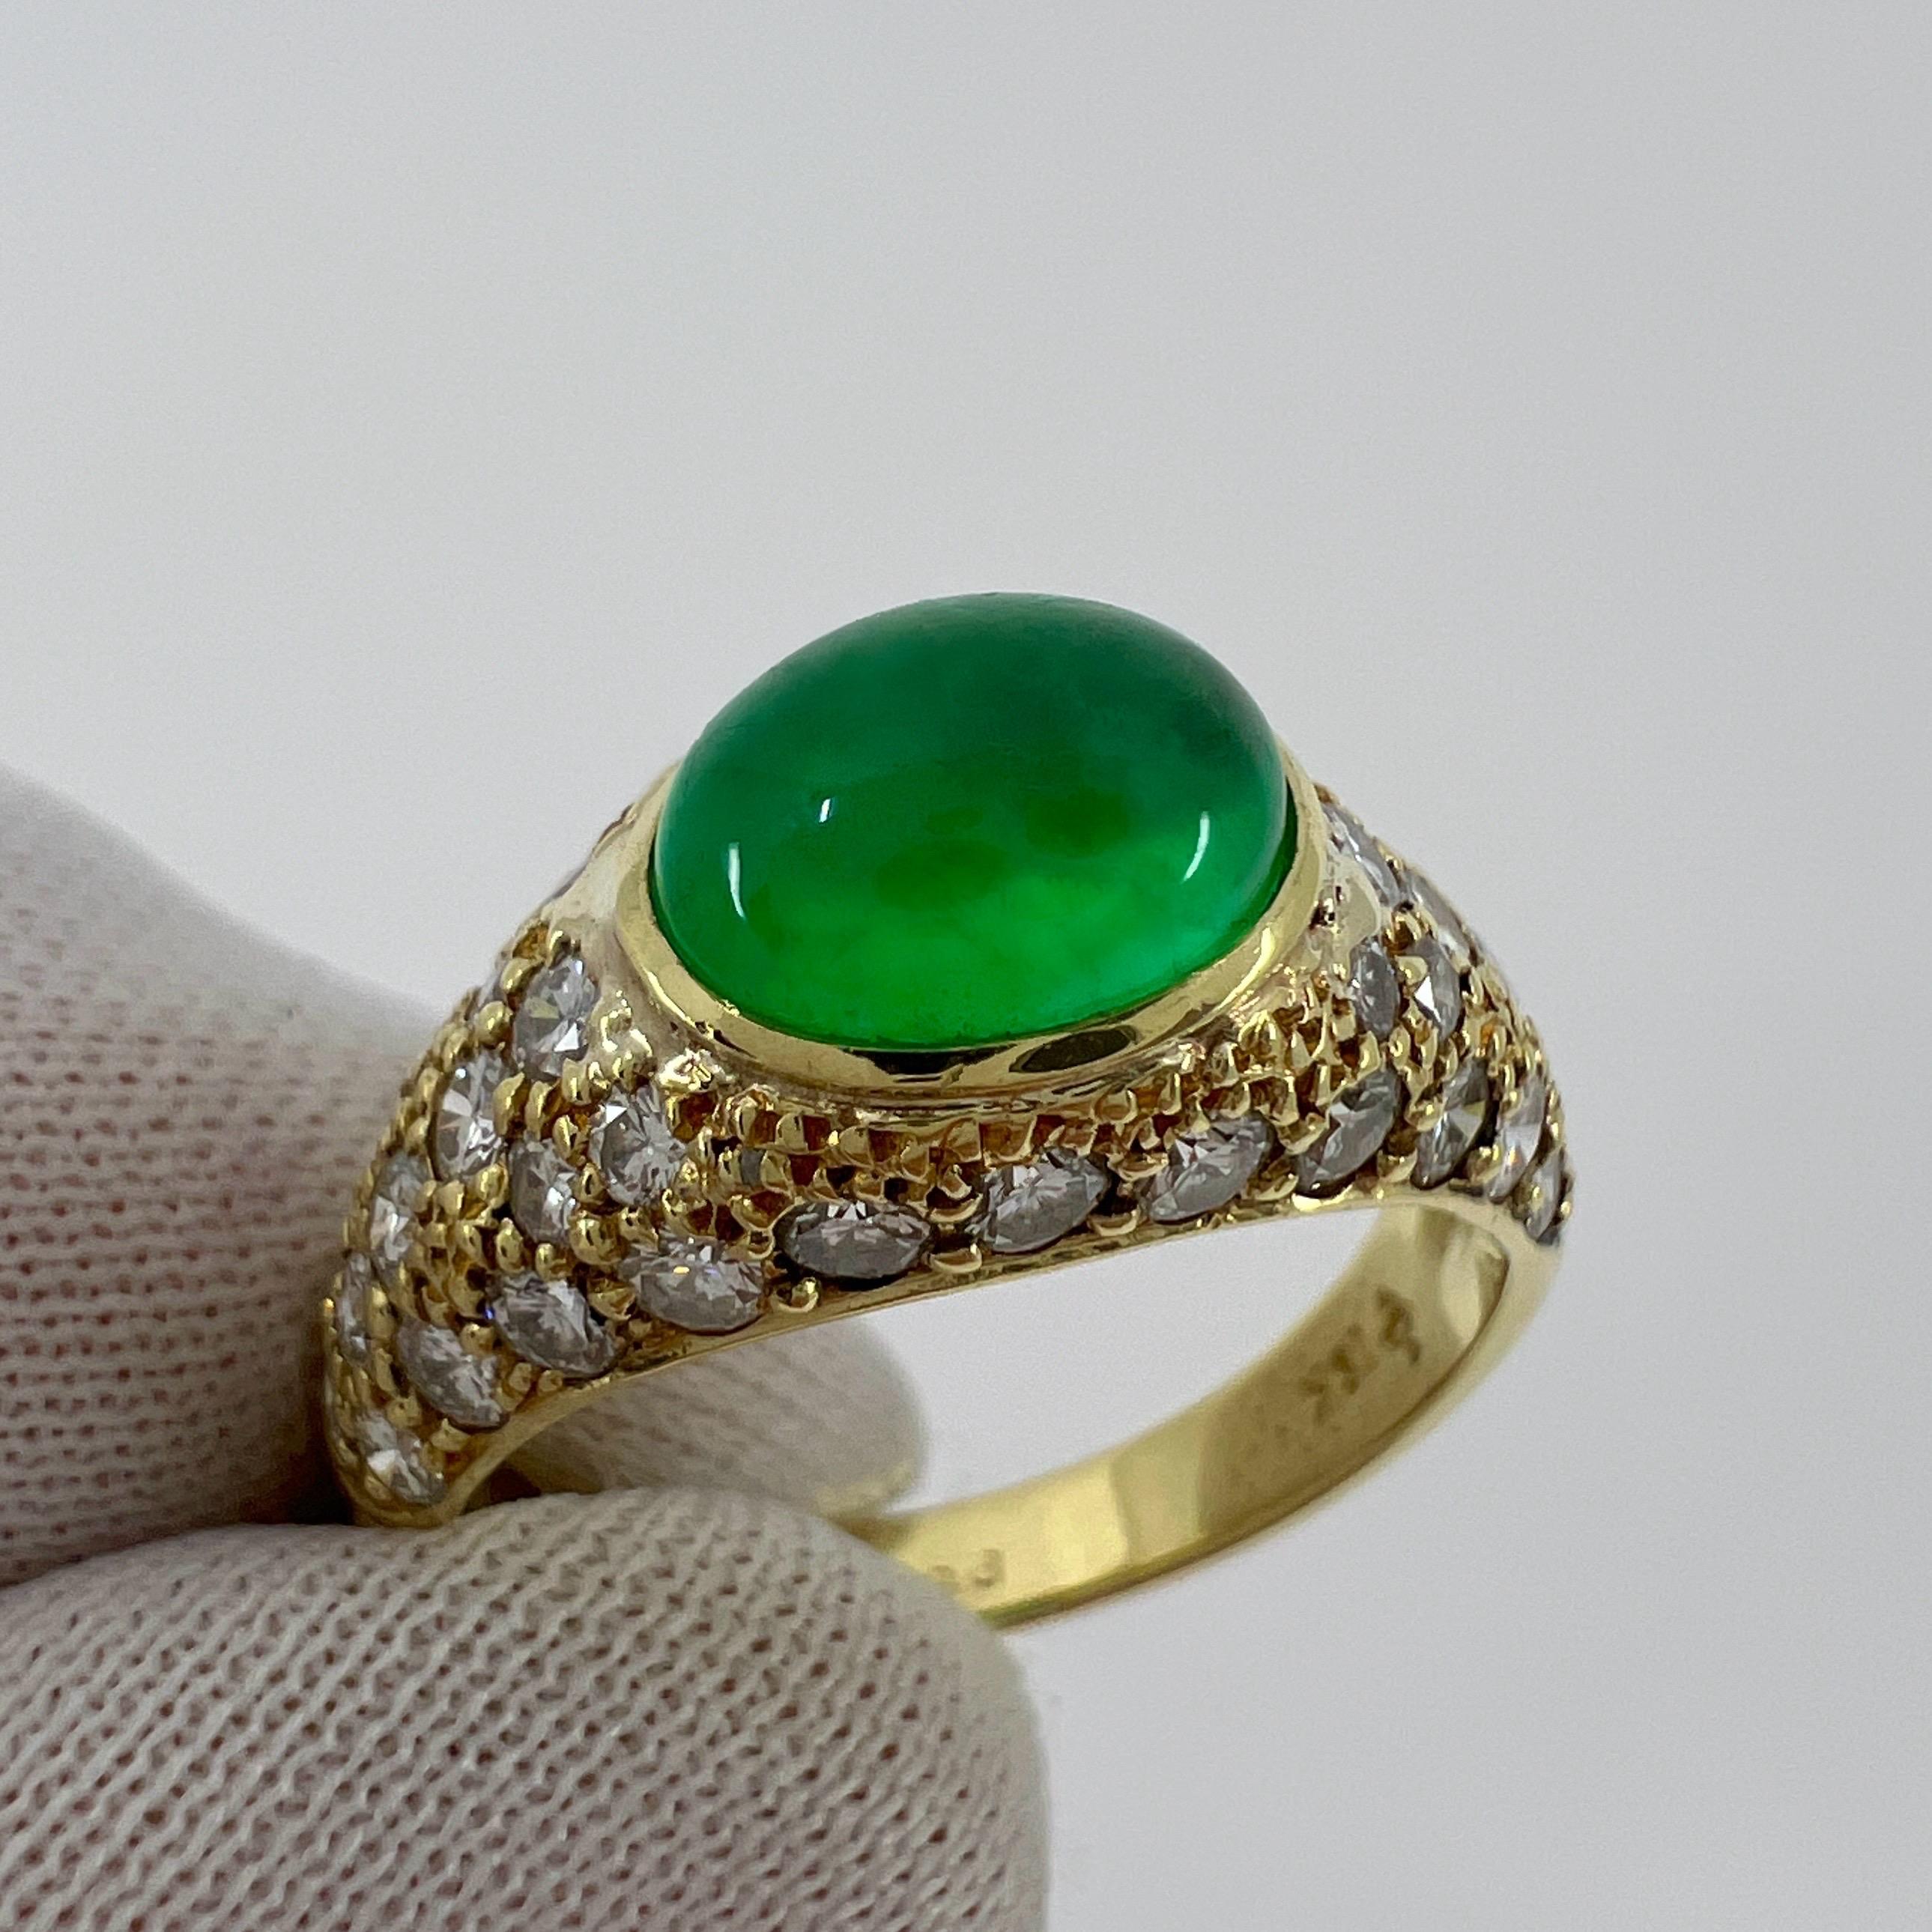 Rare Vintage Van Cleef & Arpels 2 Carat Emerald And Diamond Cocktail Dome Ring For Sale 8